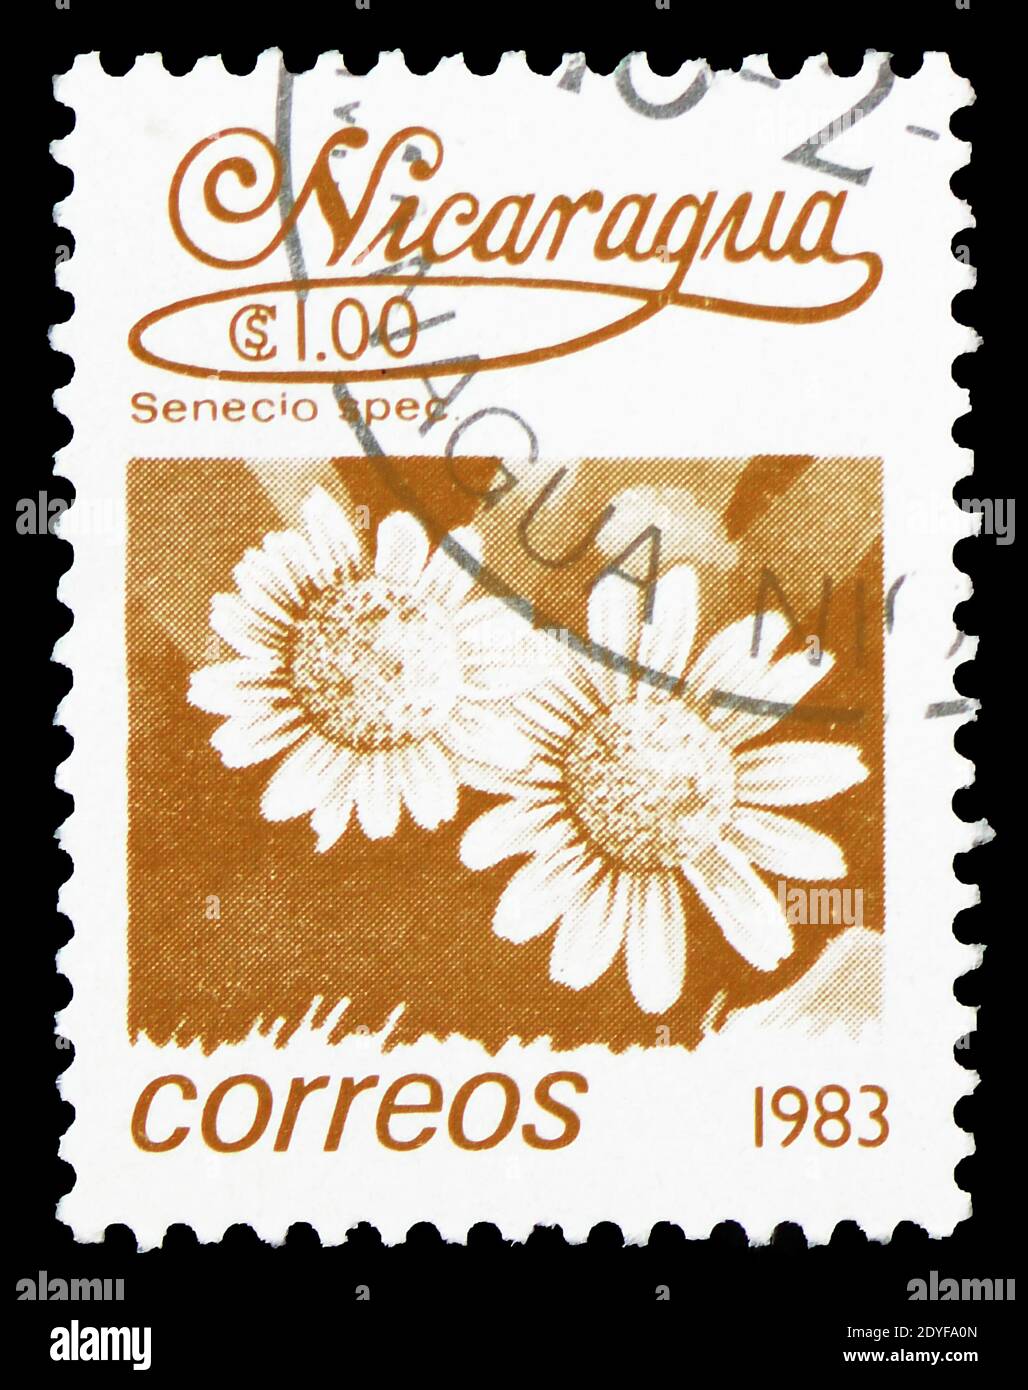 MOSCOW, RUSSIA - FEBRUARY 22, 2019: A stamp printed in Nicaragua shows Senecio sp., Local Flowers serie, circa 1983 Stock Photo